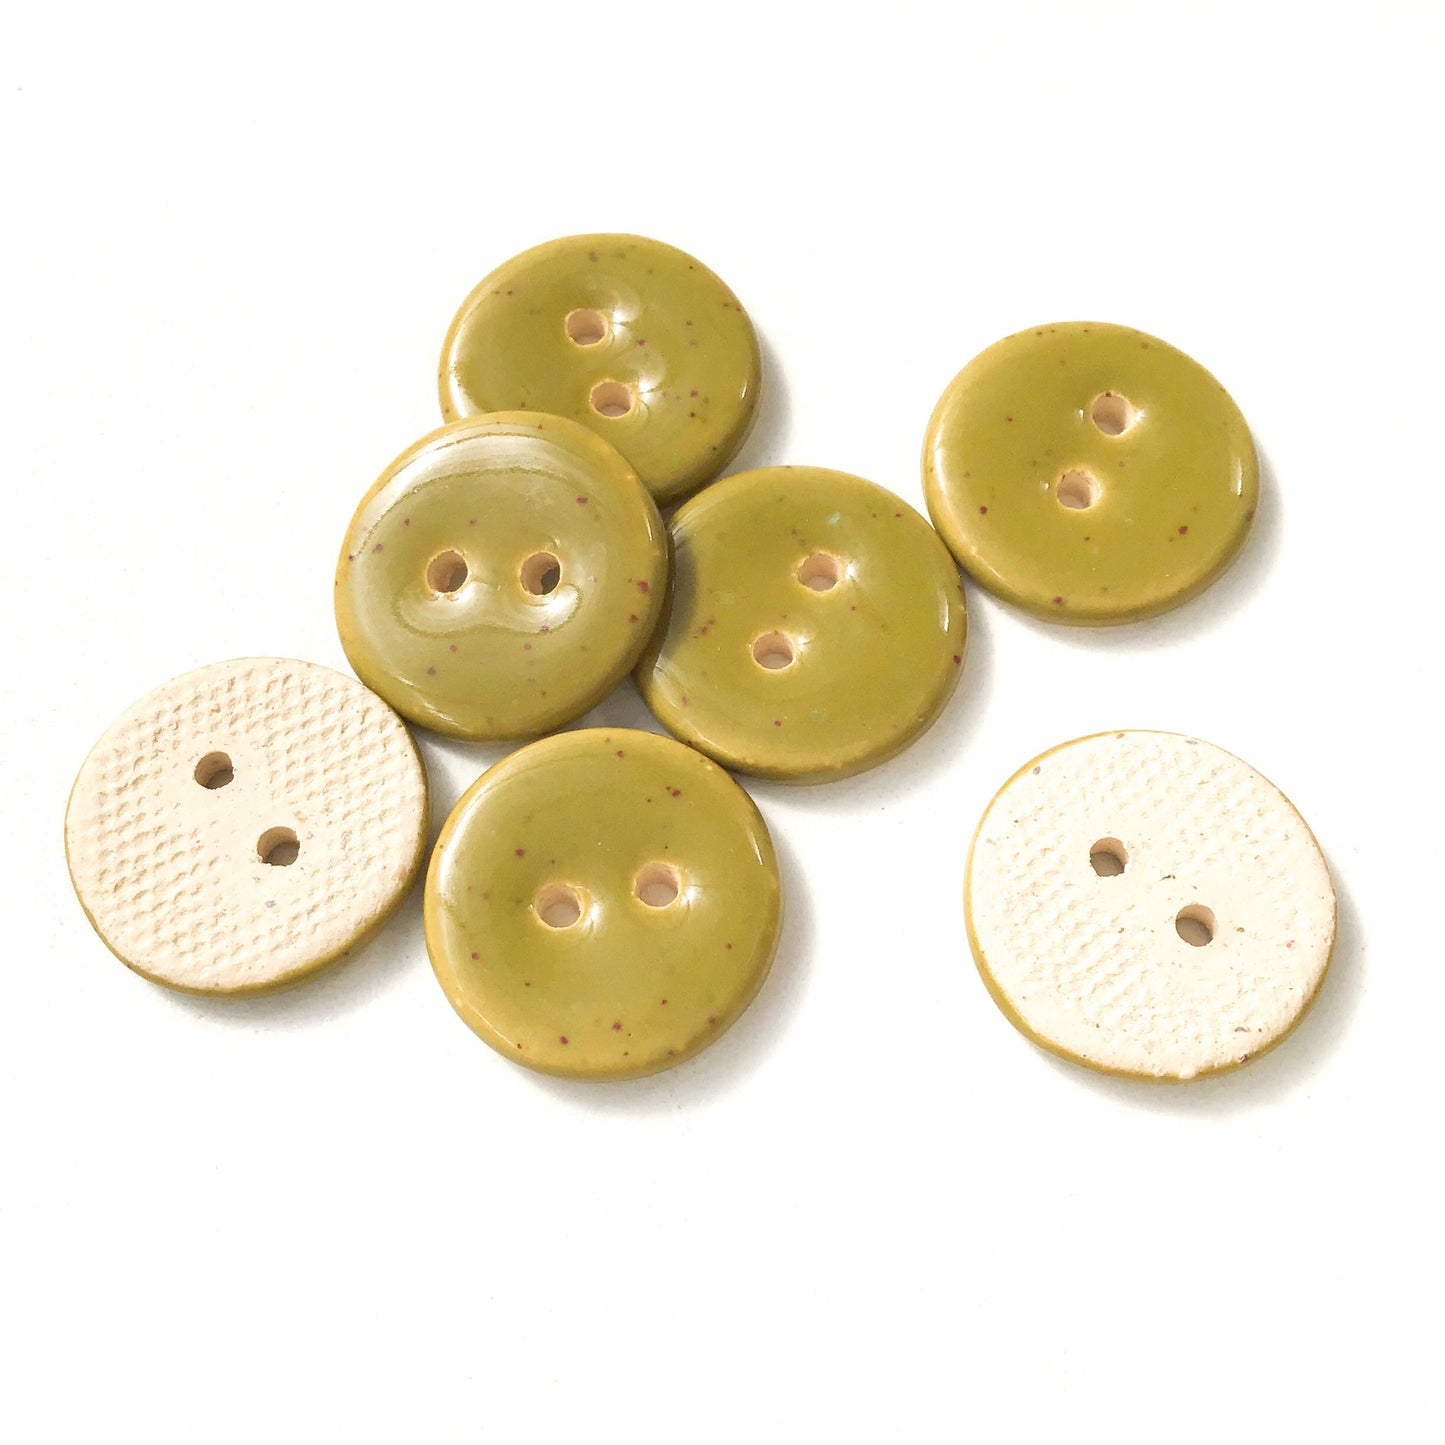 Speckled Olive Green Ceramic Buttons - Mossy Green Clay Buttons - 3/4" (ws-222)